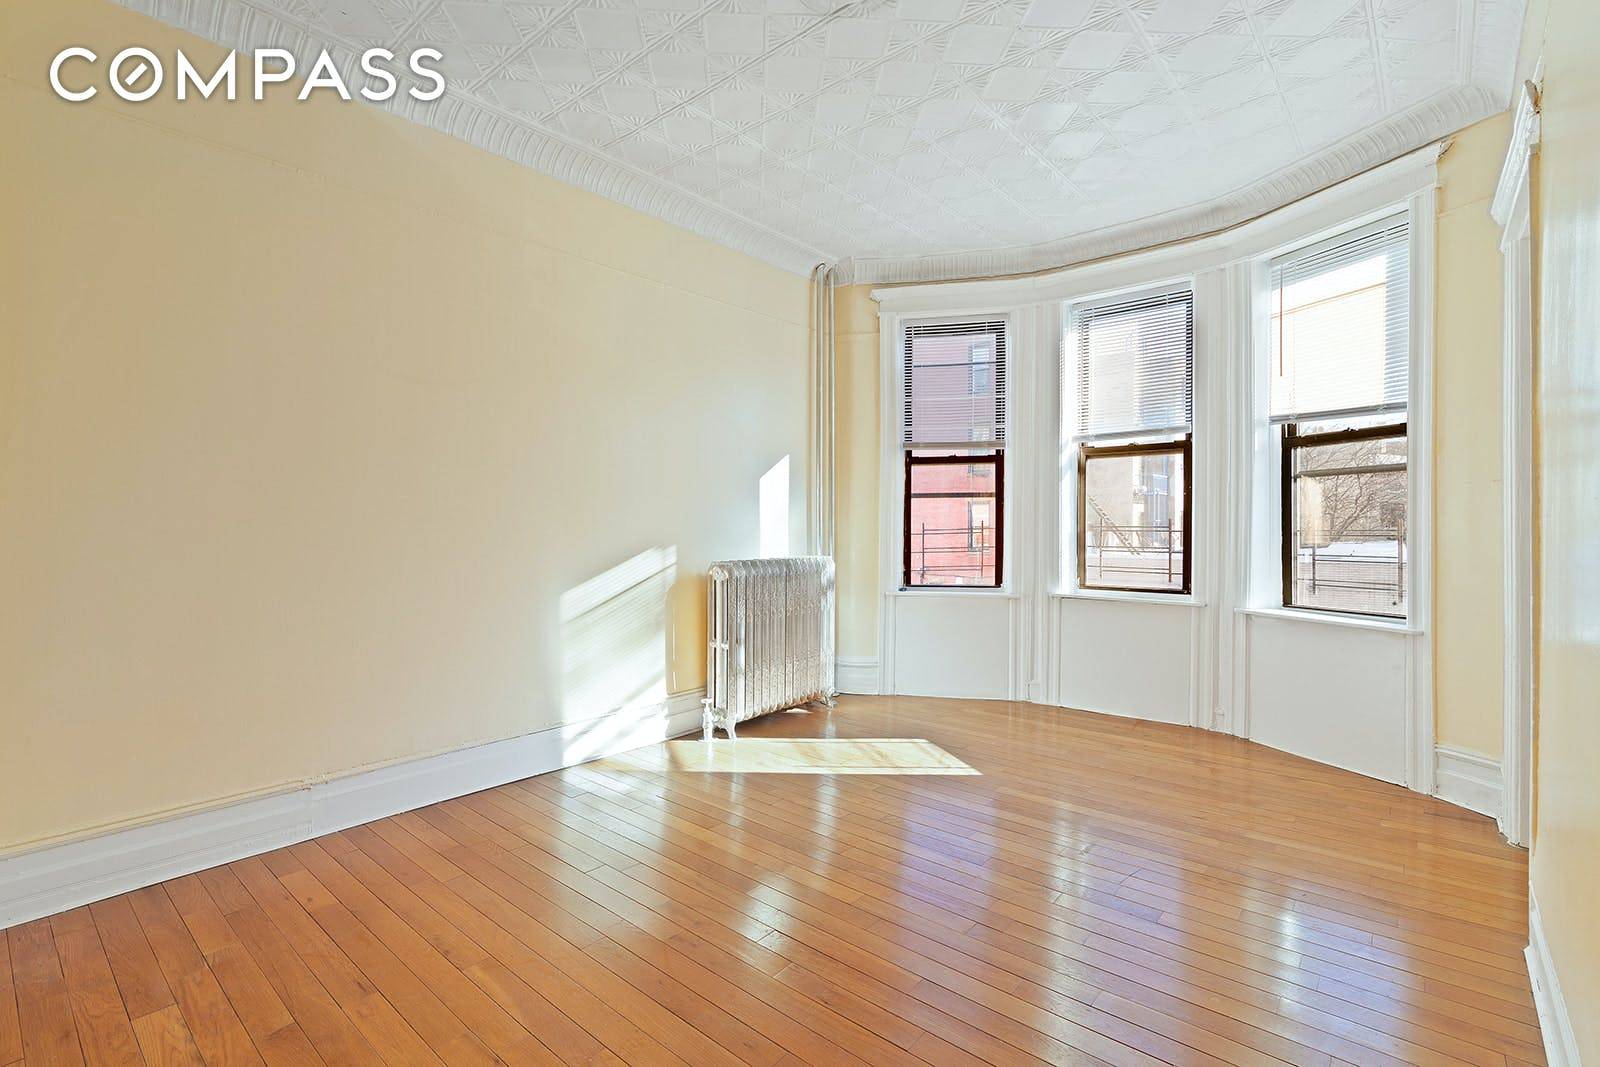 This legal 3 Family home is located on one of the most bustling streets in Bedford Stuyvesant.